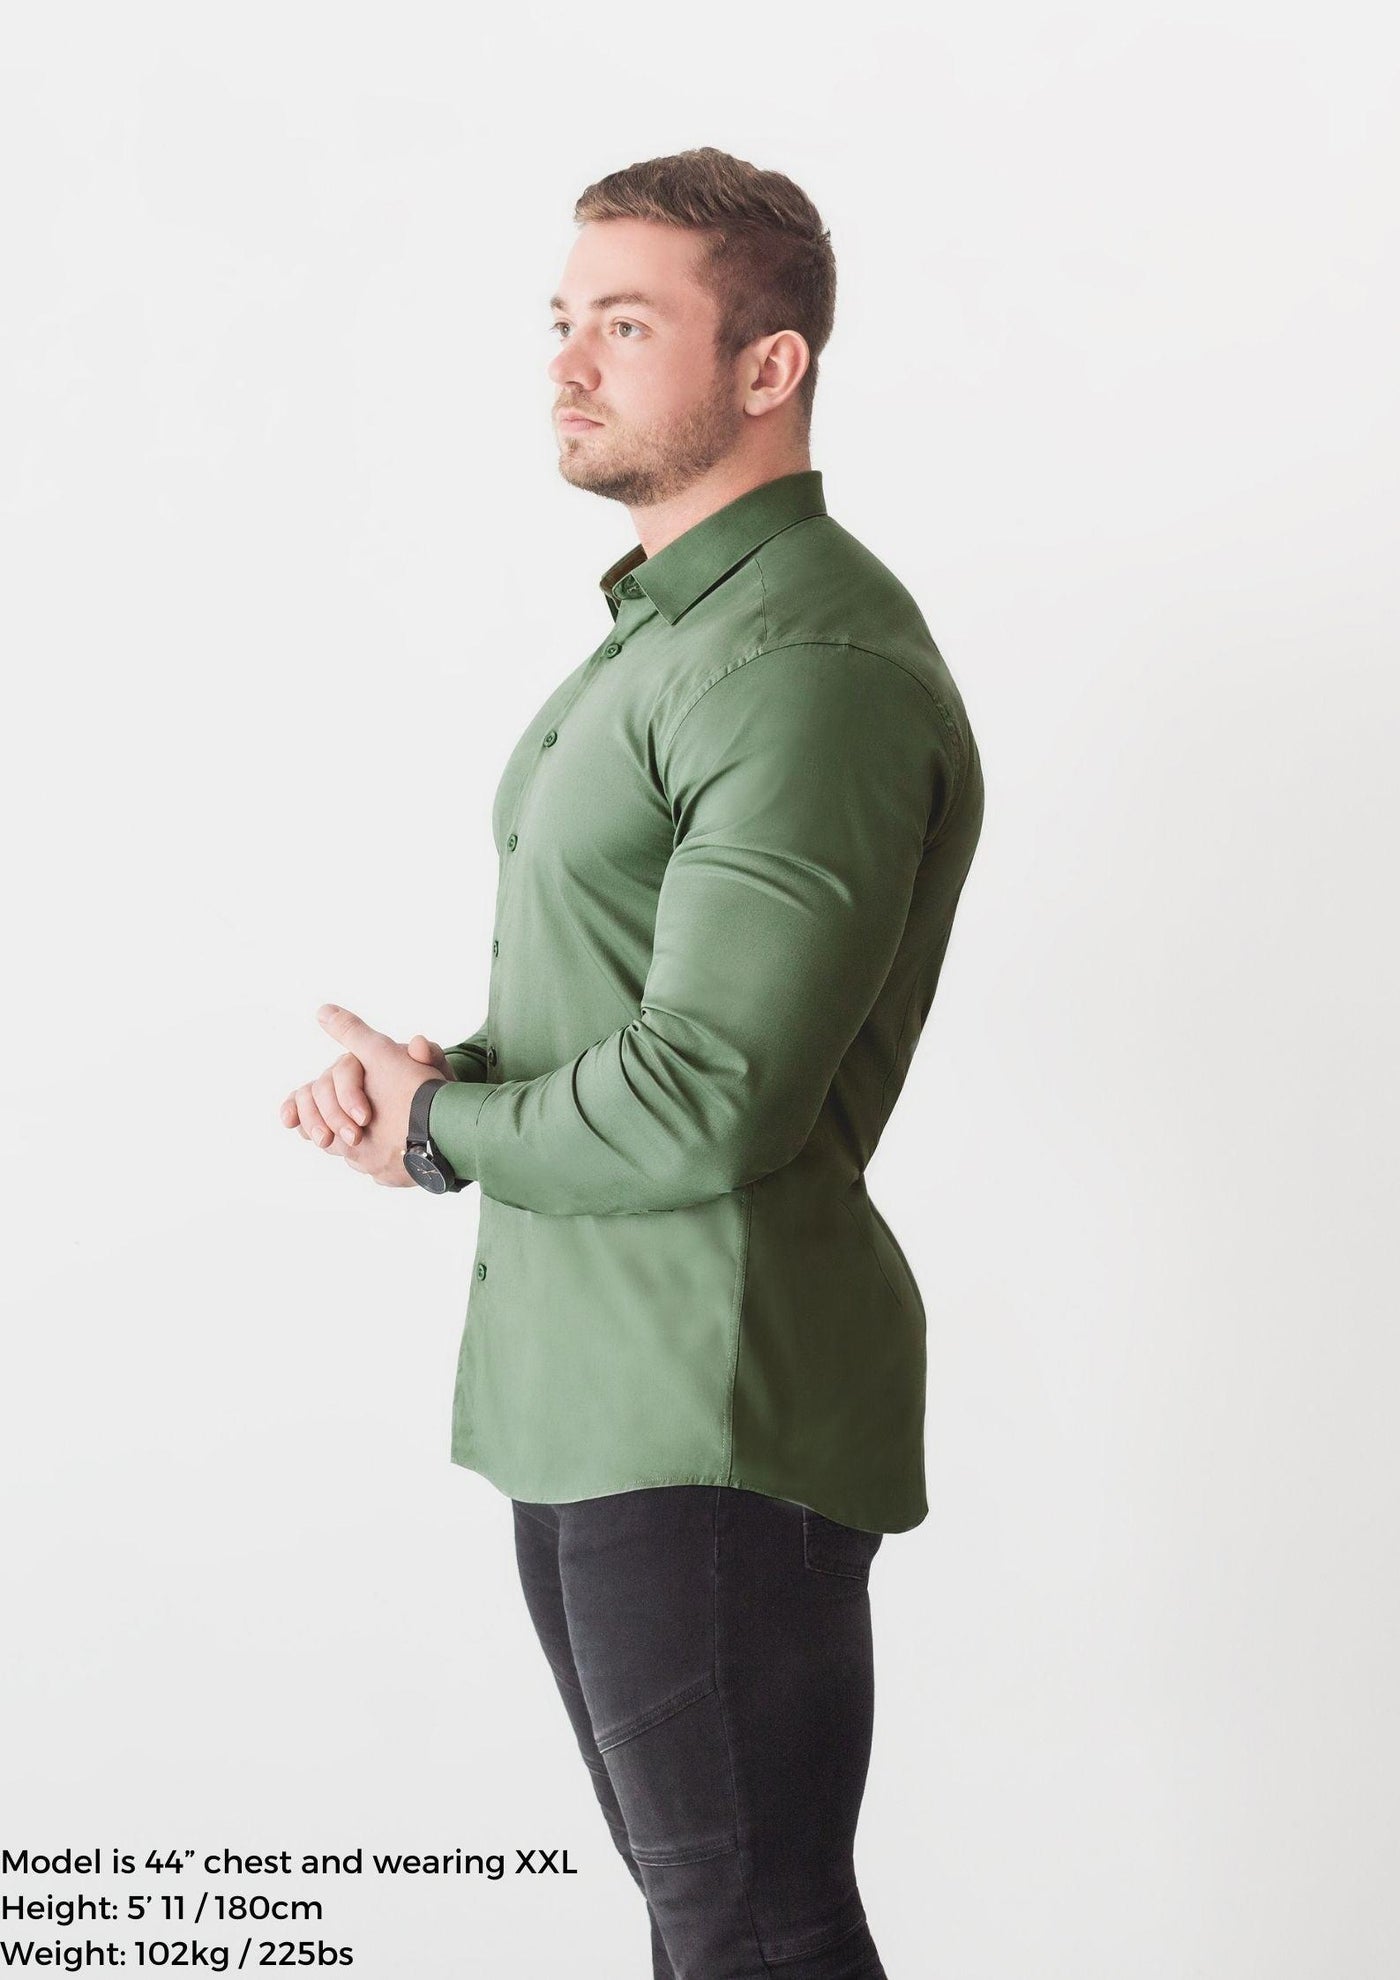 Olive Green Tapered Fit Shirt For Men. A Proportionally Fitted and Army Green Muscle Fit Shirt. Ideal for bodybuilders.